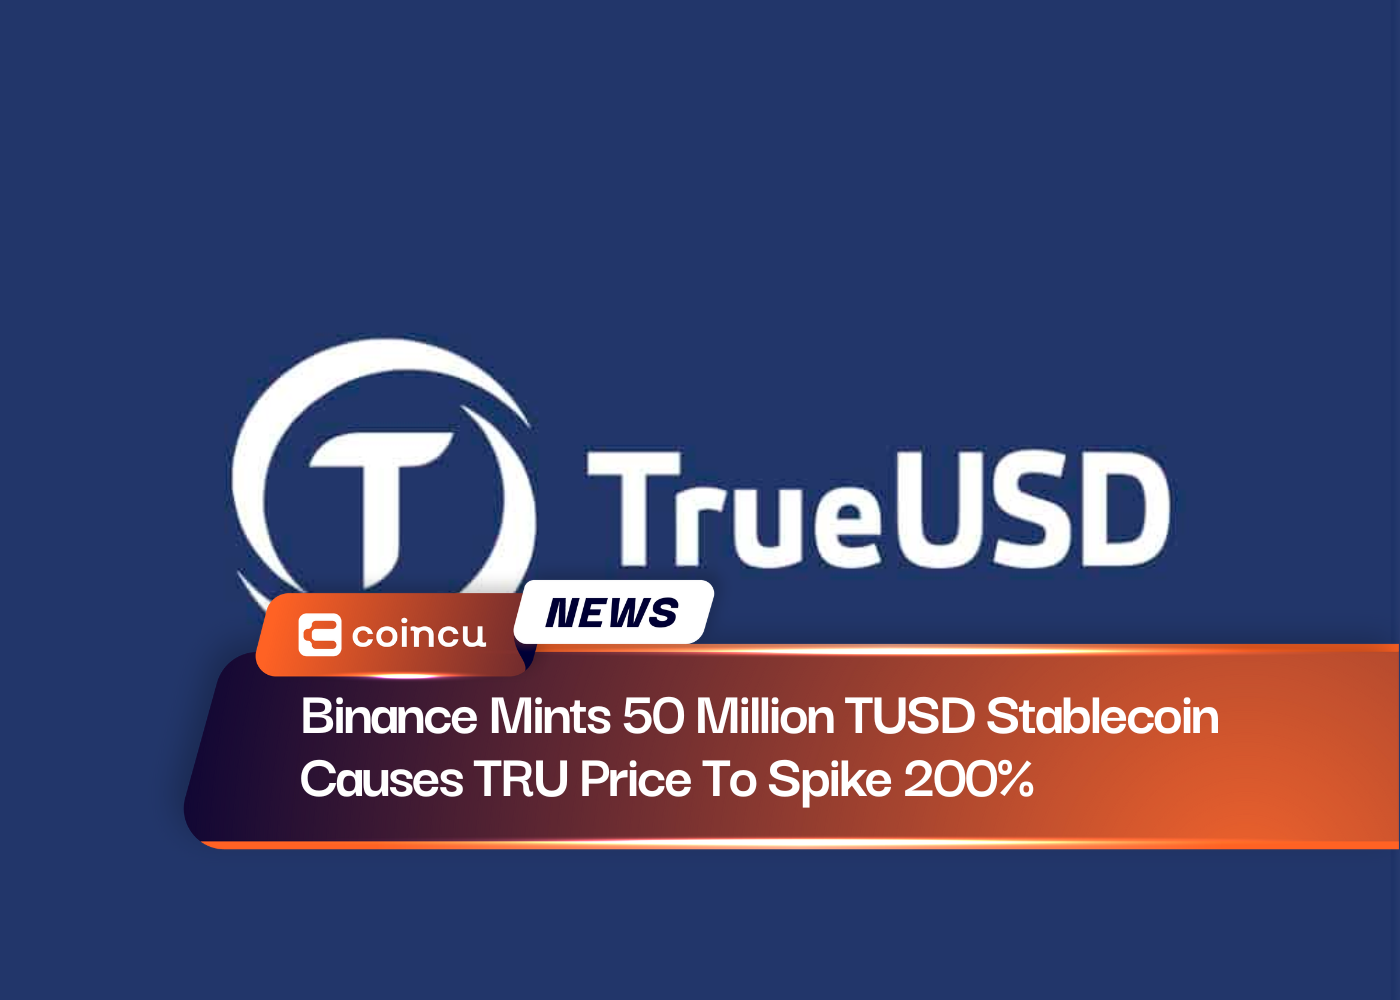 Binance Mints 50 Million TUSD Stablecoin Causes TRU Price To Spike 200%